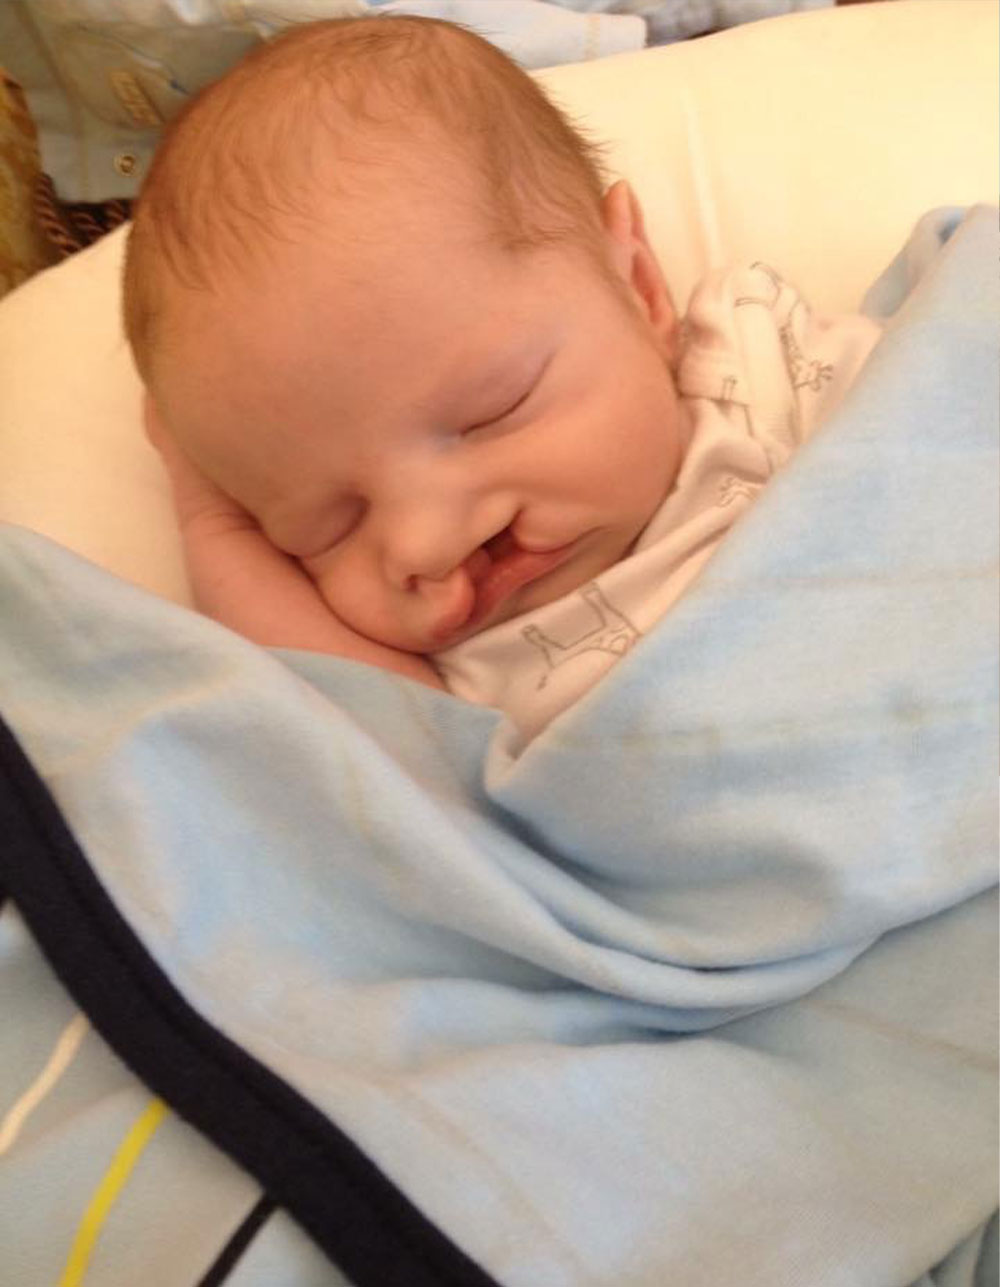 Henry as a newborn, before cleft treatment